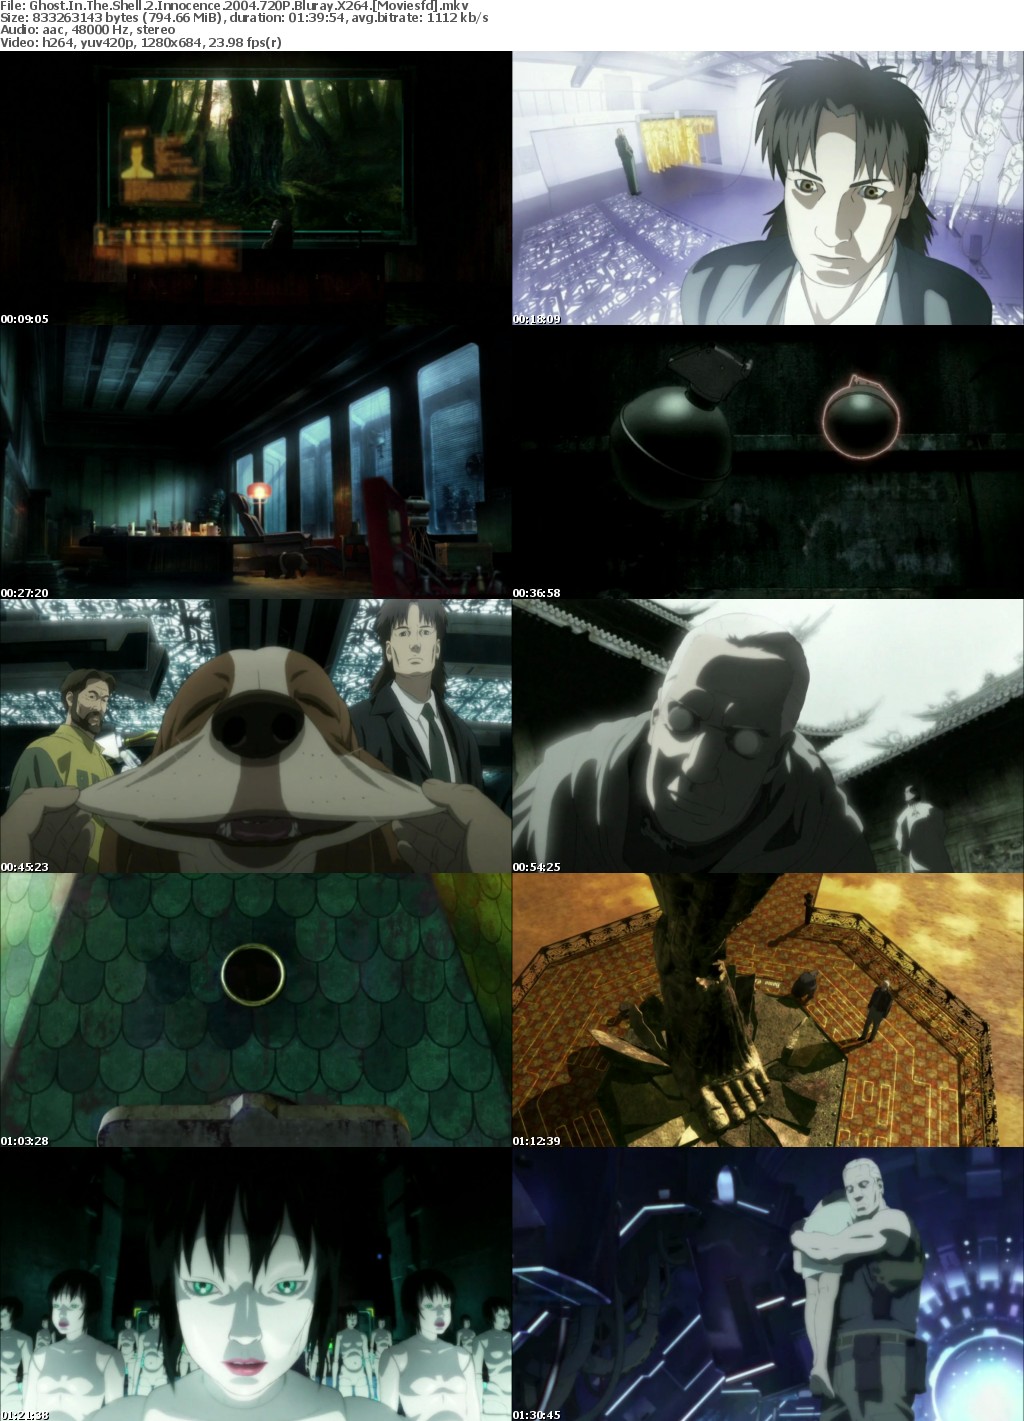 Ghost In The Shell 2 Innocence (2004) 720p BluRay x264 - MoviesFD